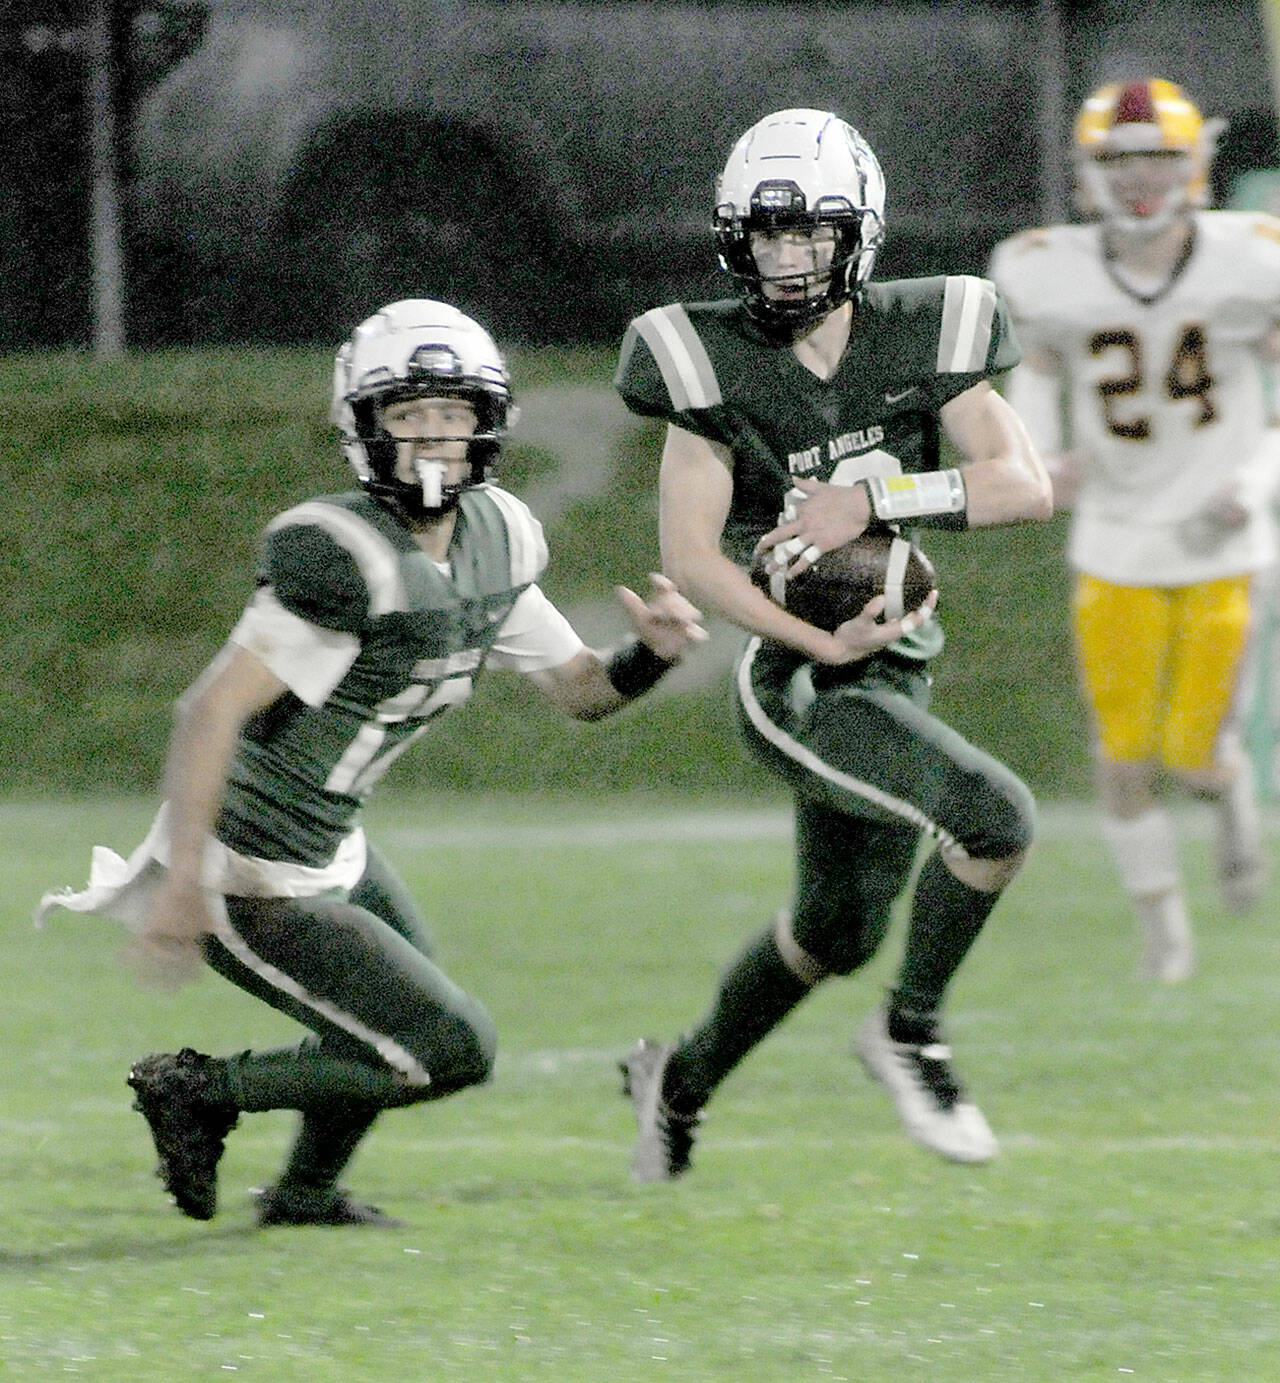 Port Angeles’ Blake Sohlberg, right, is followed by teammate Kason Albaugh, leaving Kingston’s Noah Walter far behind on Friday at Port Angeles Civic Field. (KEITH THORPE/PENINSULA DAILY NEWS)